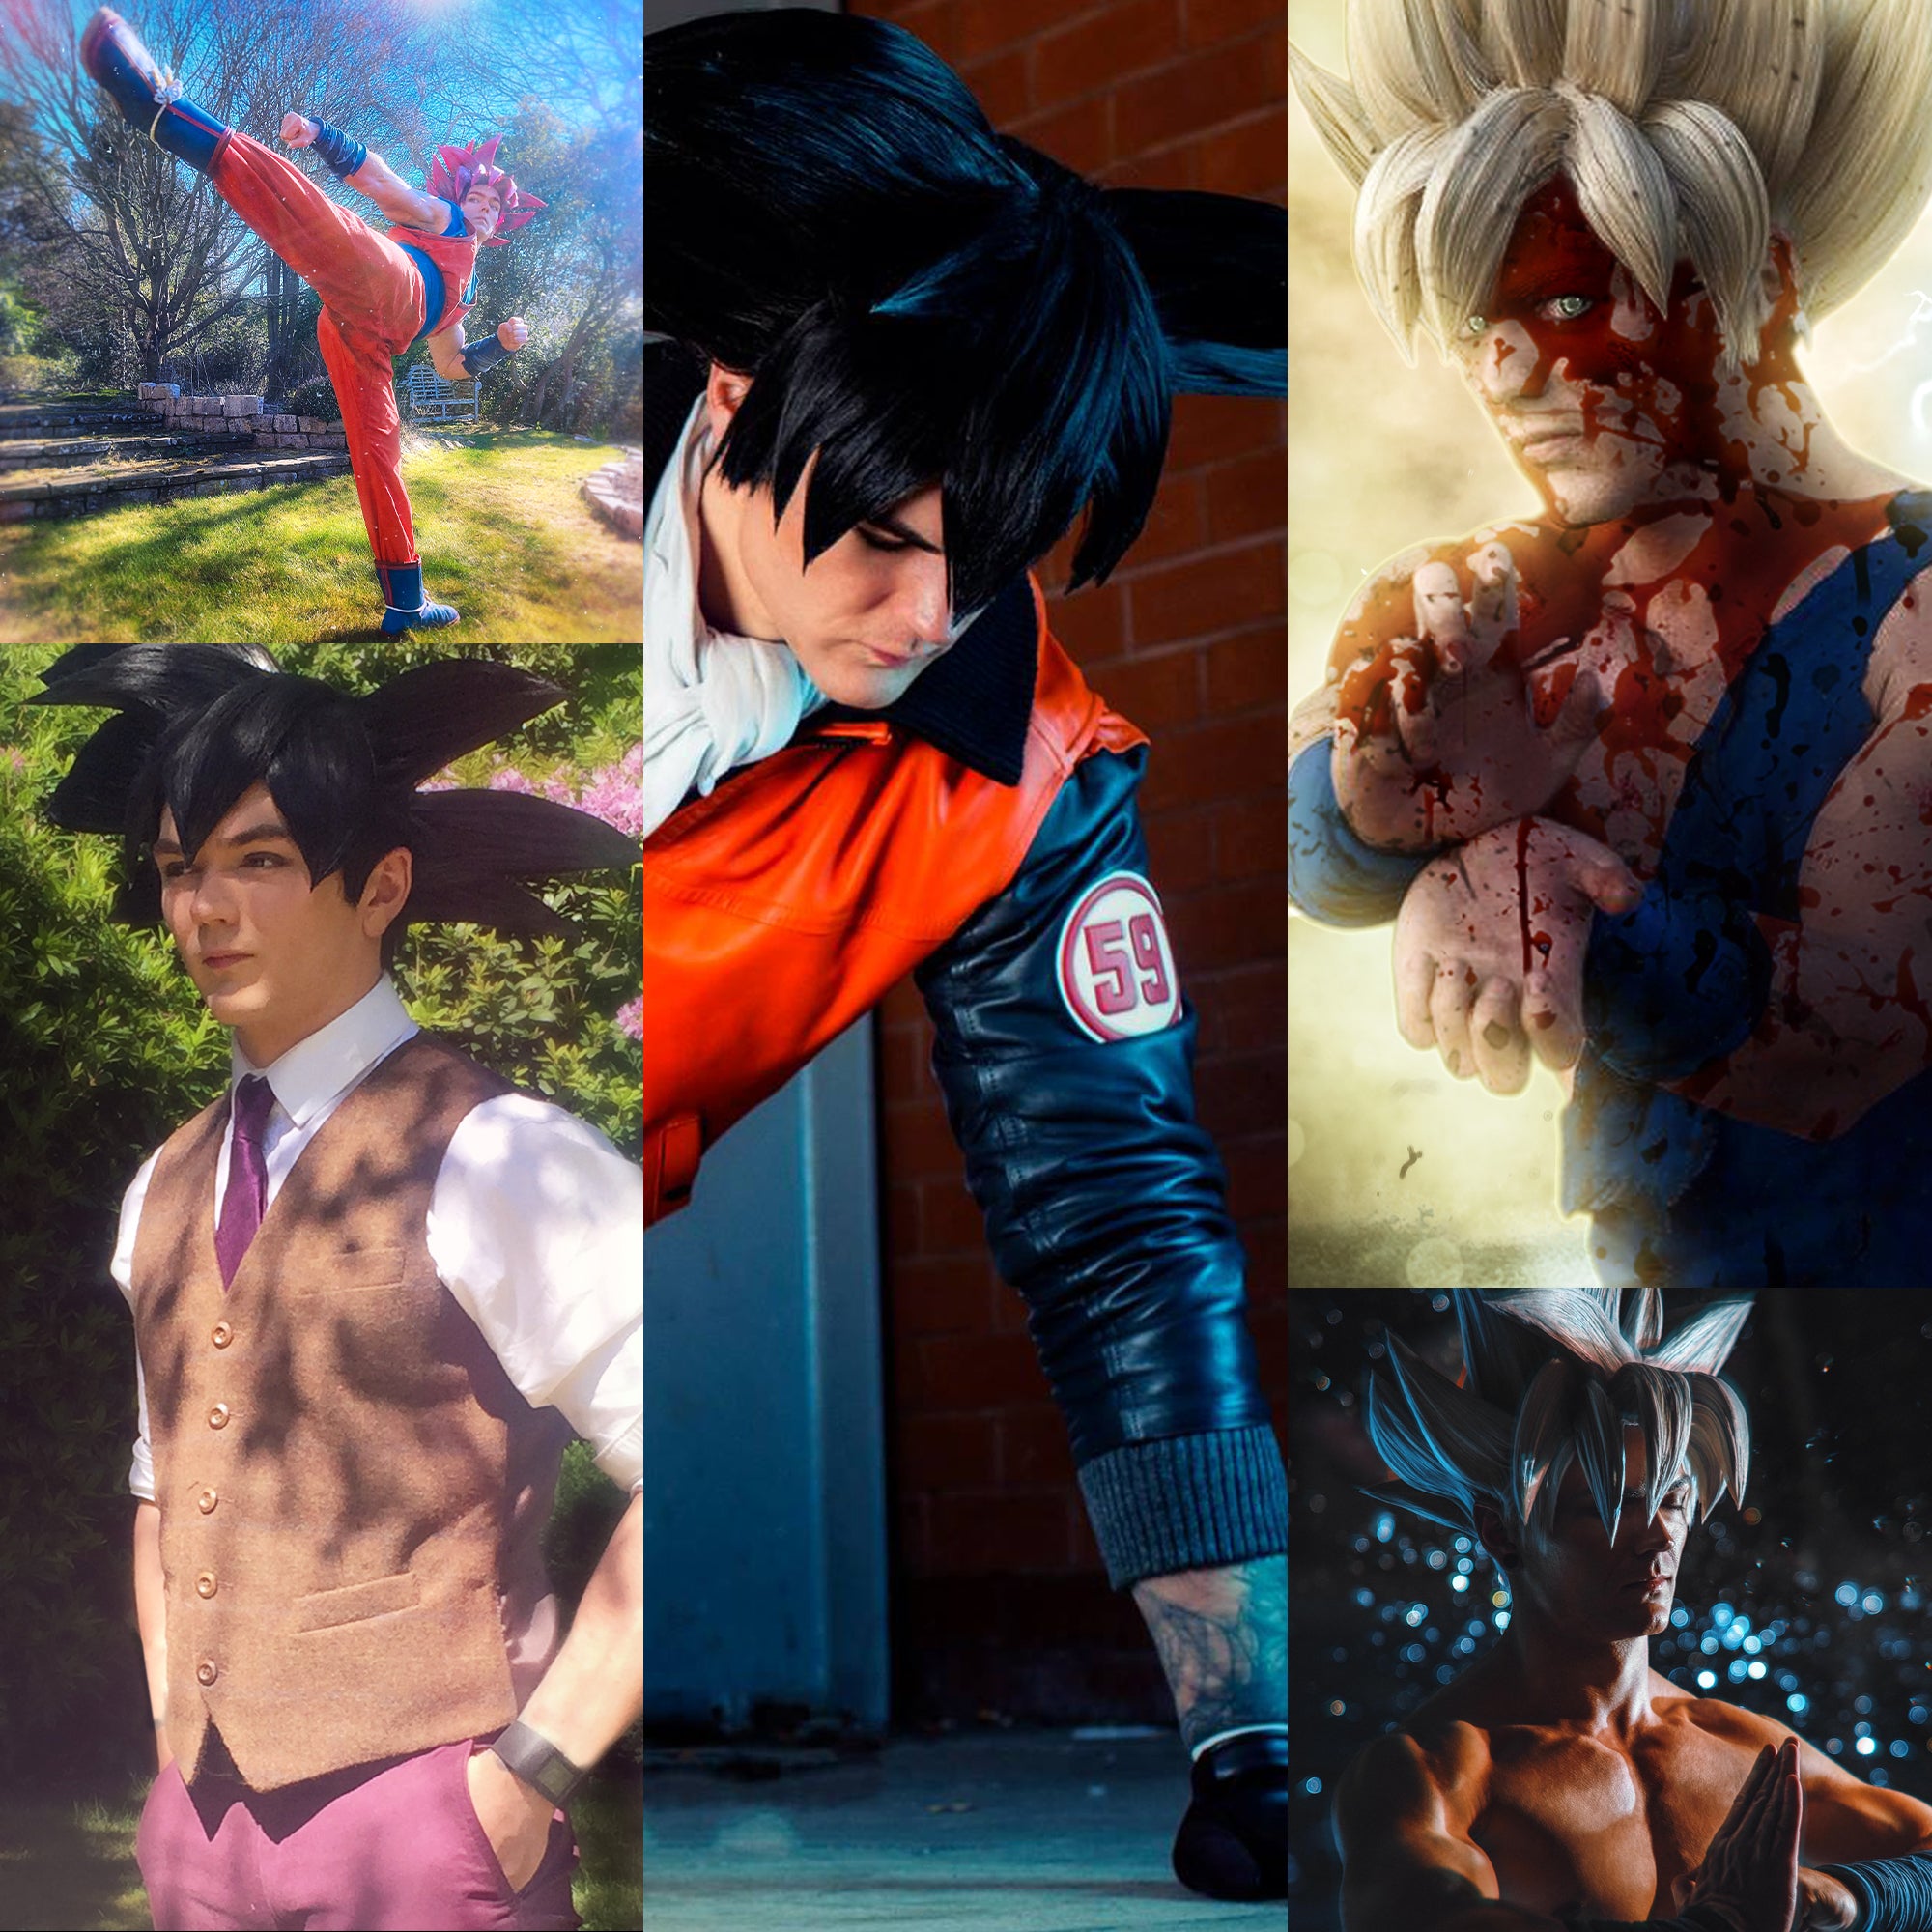 Why is 5/9 goku day? Goku cosplayer from Dragonball explains the meaning behind goku day and how many peoples lives have been touched by goku, including his own, here is a selection of some of his costumes including super saiyan god, battle damaged super saiyan, the suit from the end of Z, and mastered ultra instinct